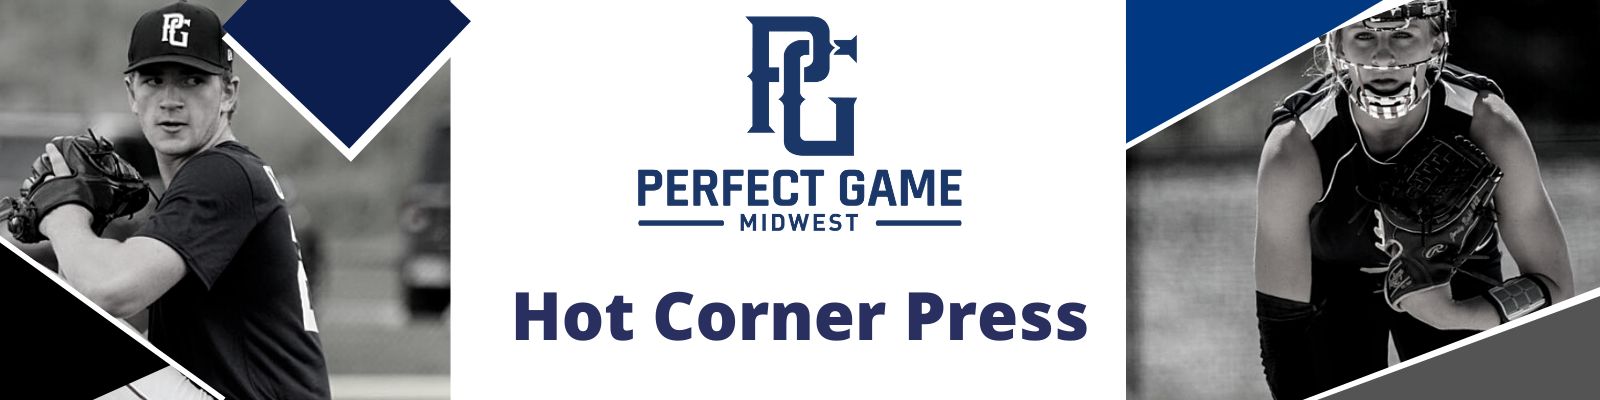 Perfect Game Midwest: Hot Corner Press Header